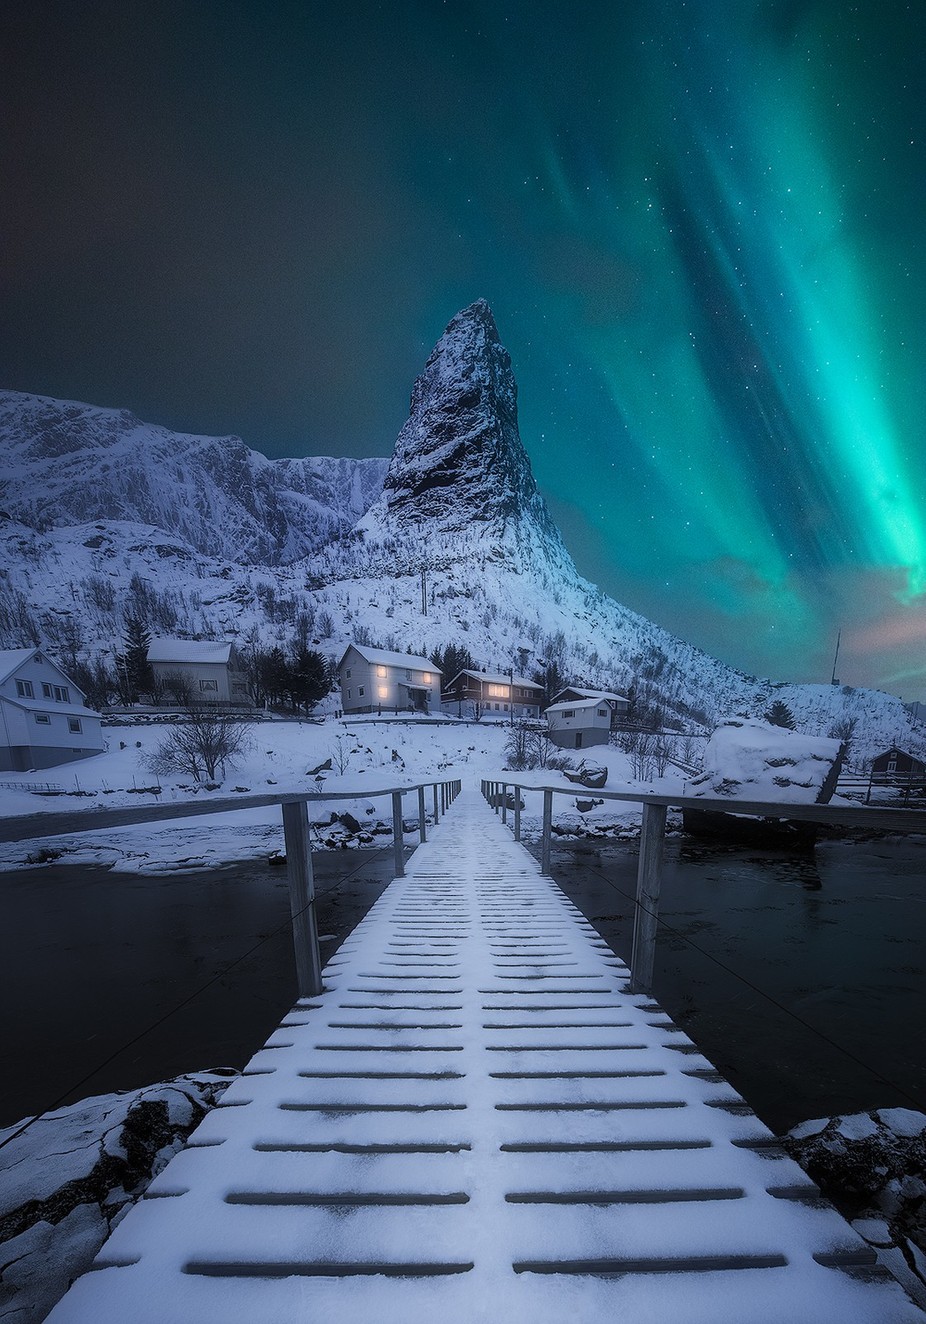 Winter Magic by tristantodd - Our World At Night Photo Contest